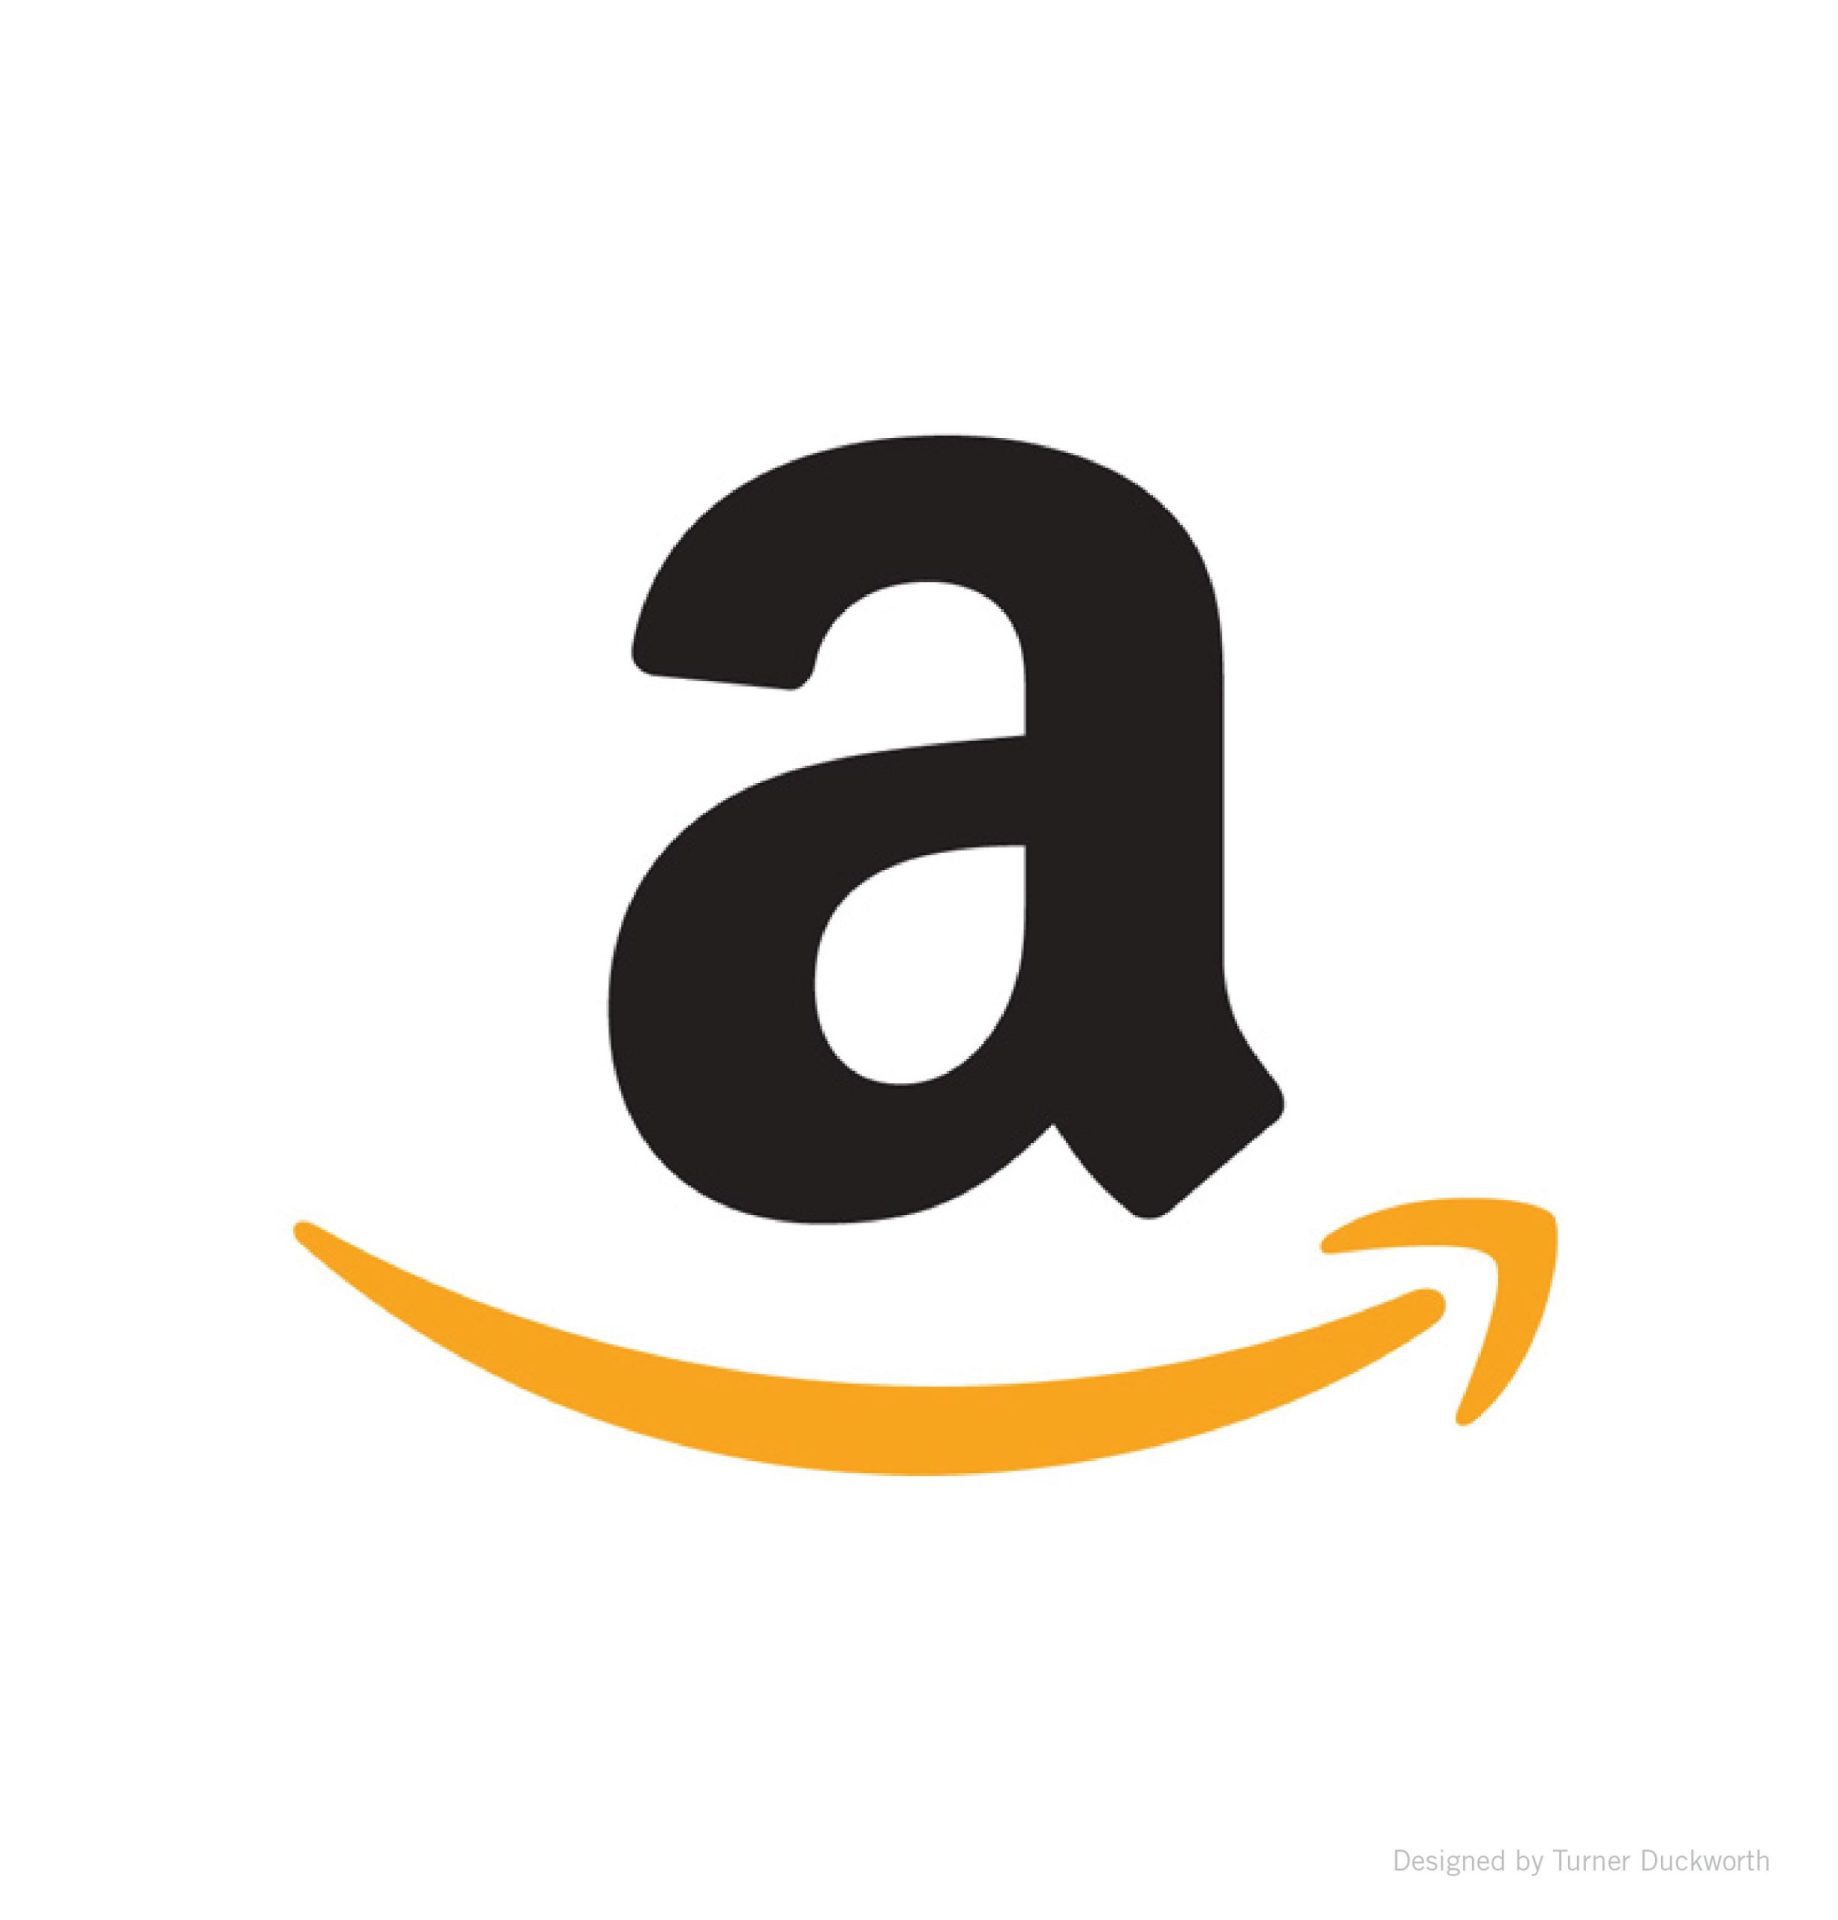 Amazon Logo: Evolution and Meaning Behind the Iconic Brand Symbol